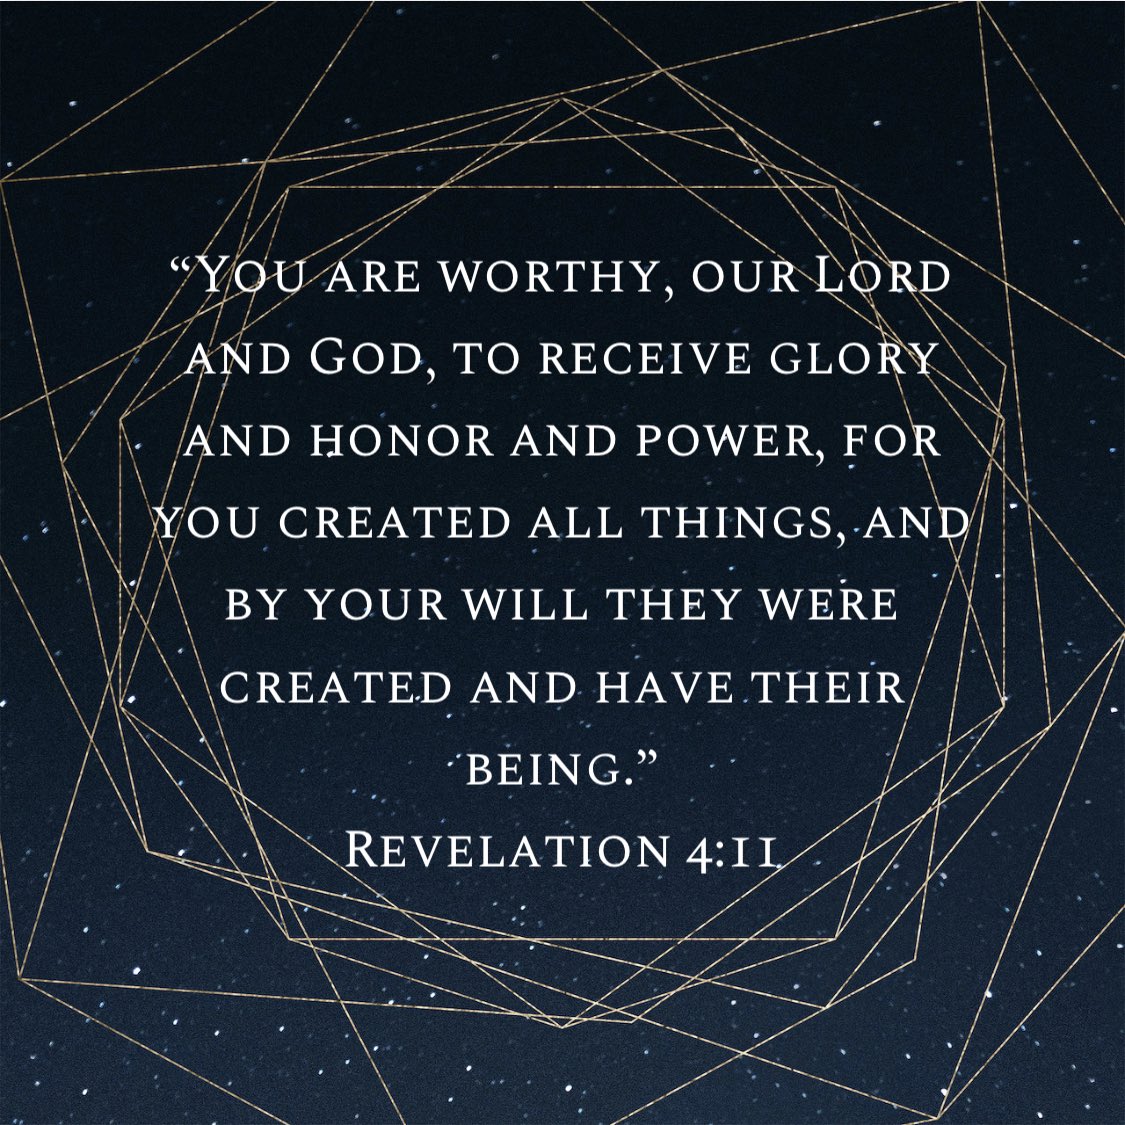 “You are worthy, our Lord and God, to receive glory and honor and power, for you created all things, and by your will they were created and have their being.””
Revelation 4:11 NIV

bible.com/bible/111/rev.…

#InfernoMob 🔥 
#PatriotsCross ✝️
#UnitedWeStand 🗽
#UWS369 🇺🇸